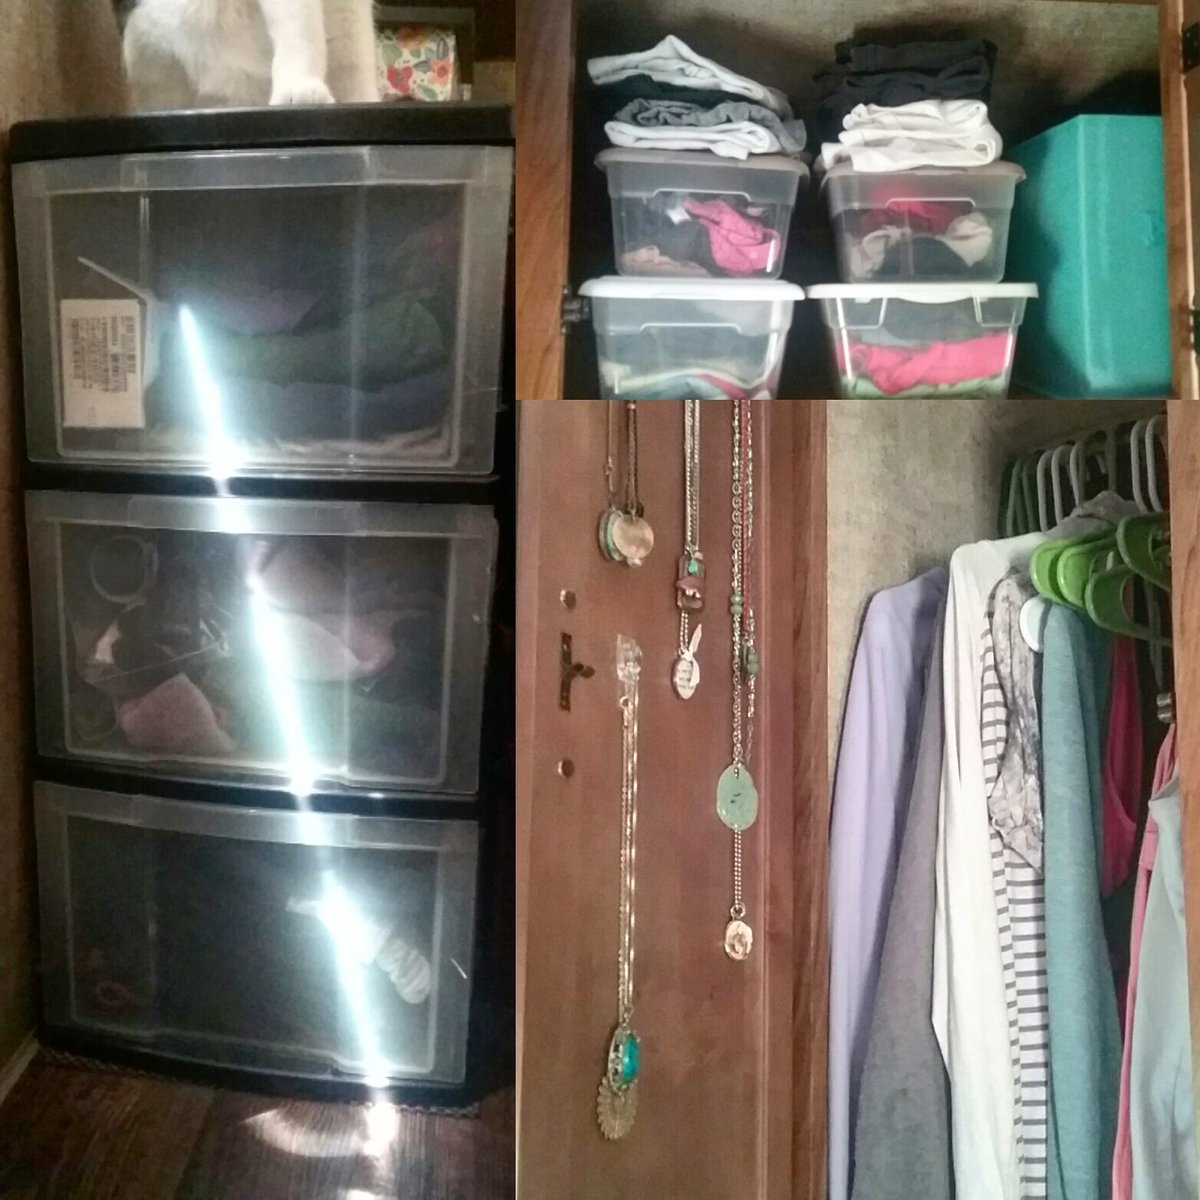 Almost my entire wardrobe, plus jewelry. All organized & ready to hit the road on Sat! #rvlife #rvliving #minimalism #lessstuffmorelife